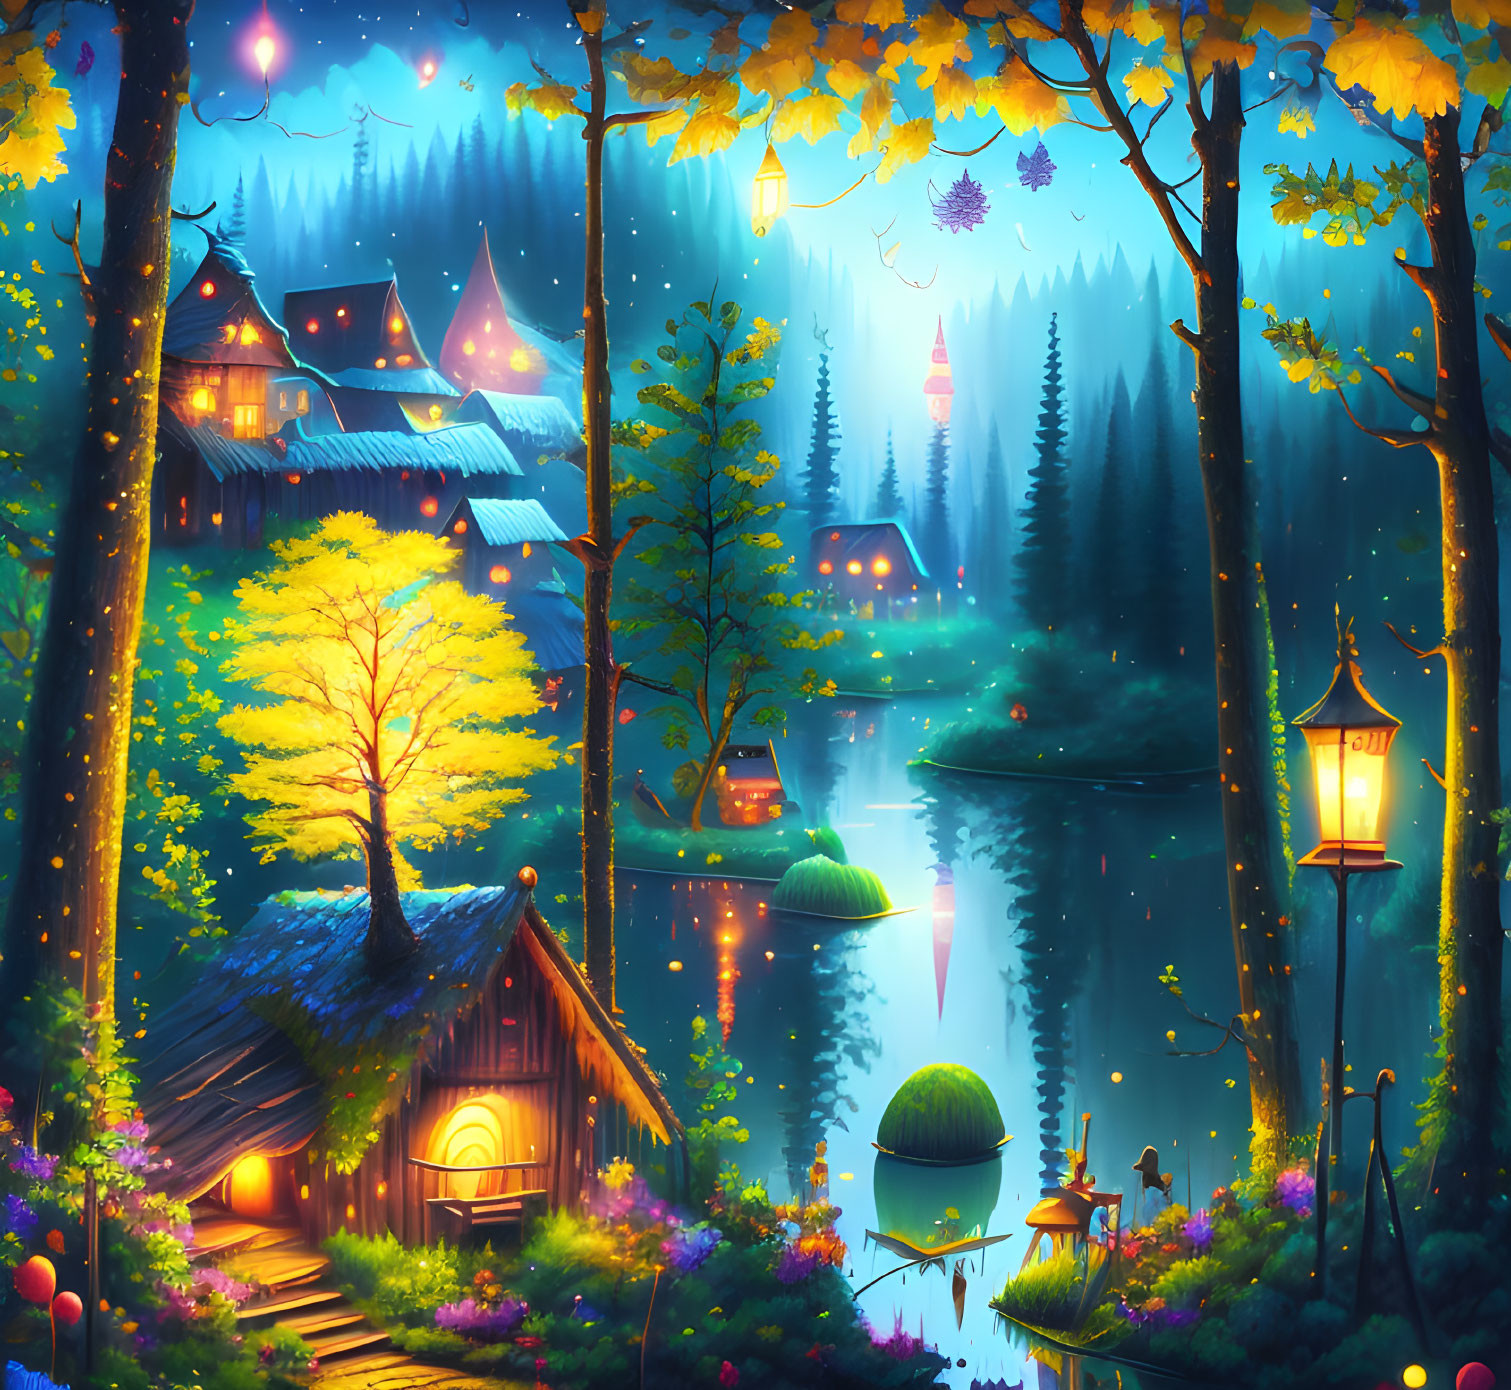 Twilight fantasy landscape with glowing lanterns, lake, cottages, and magical forest